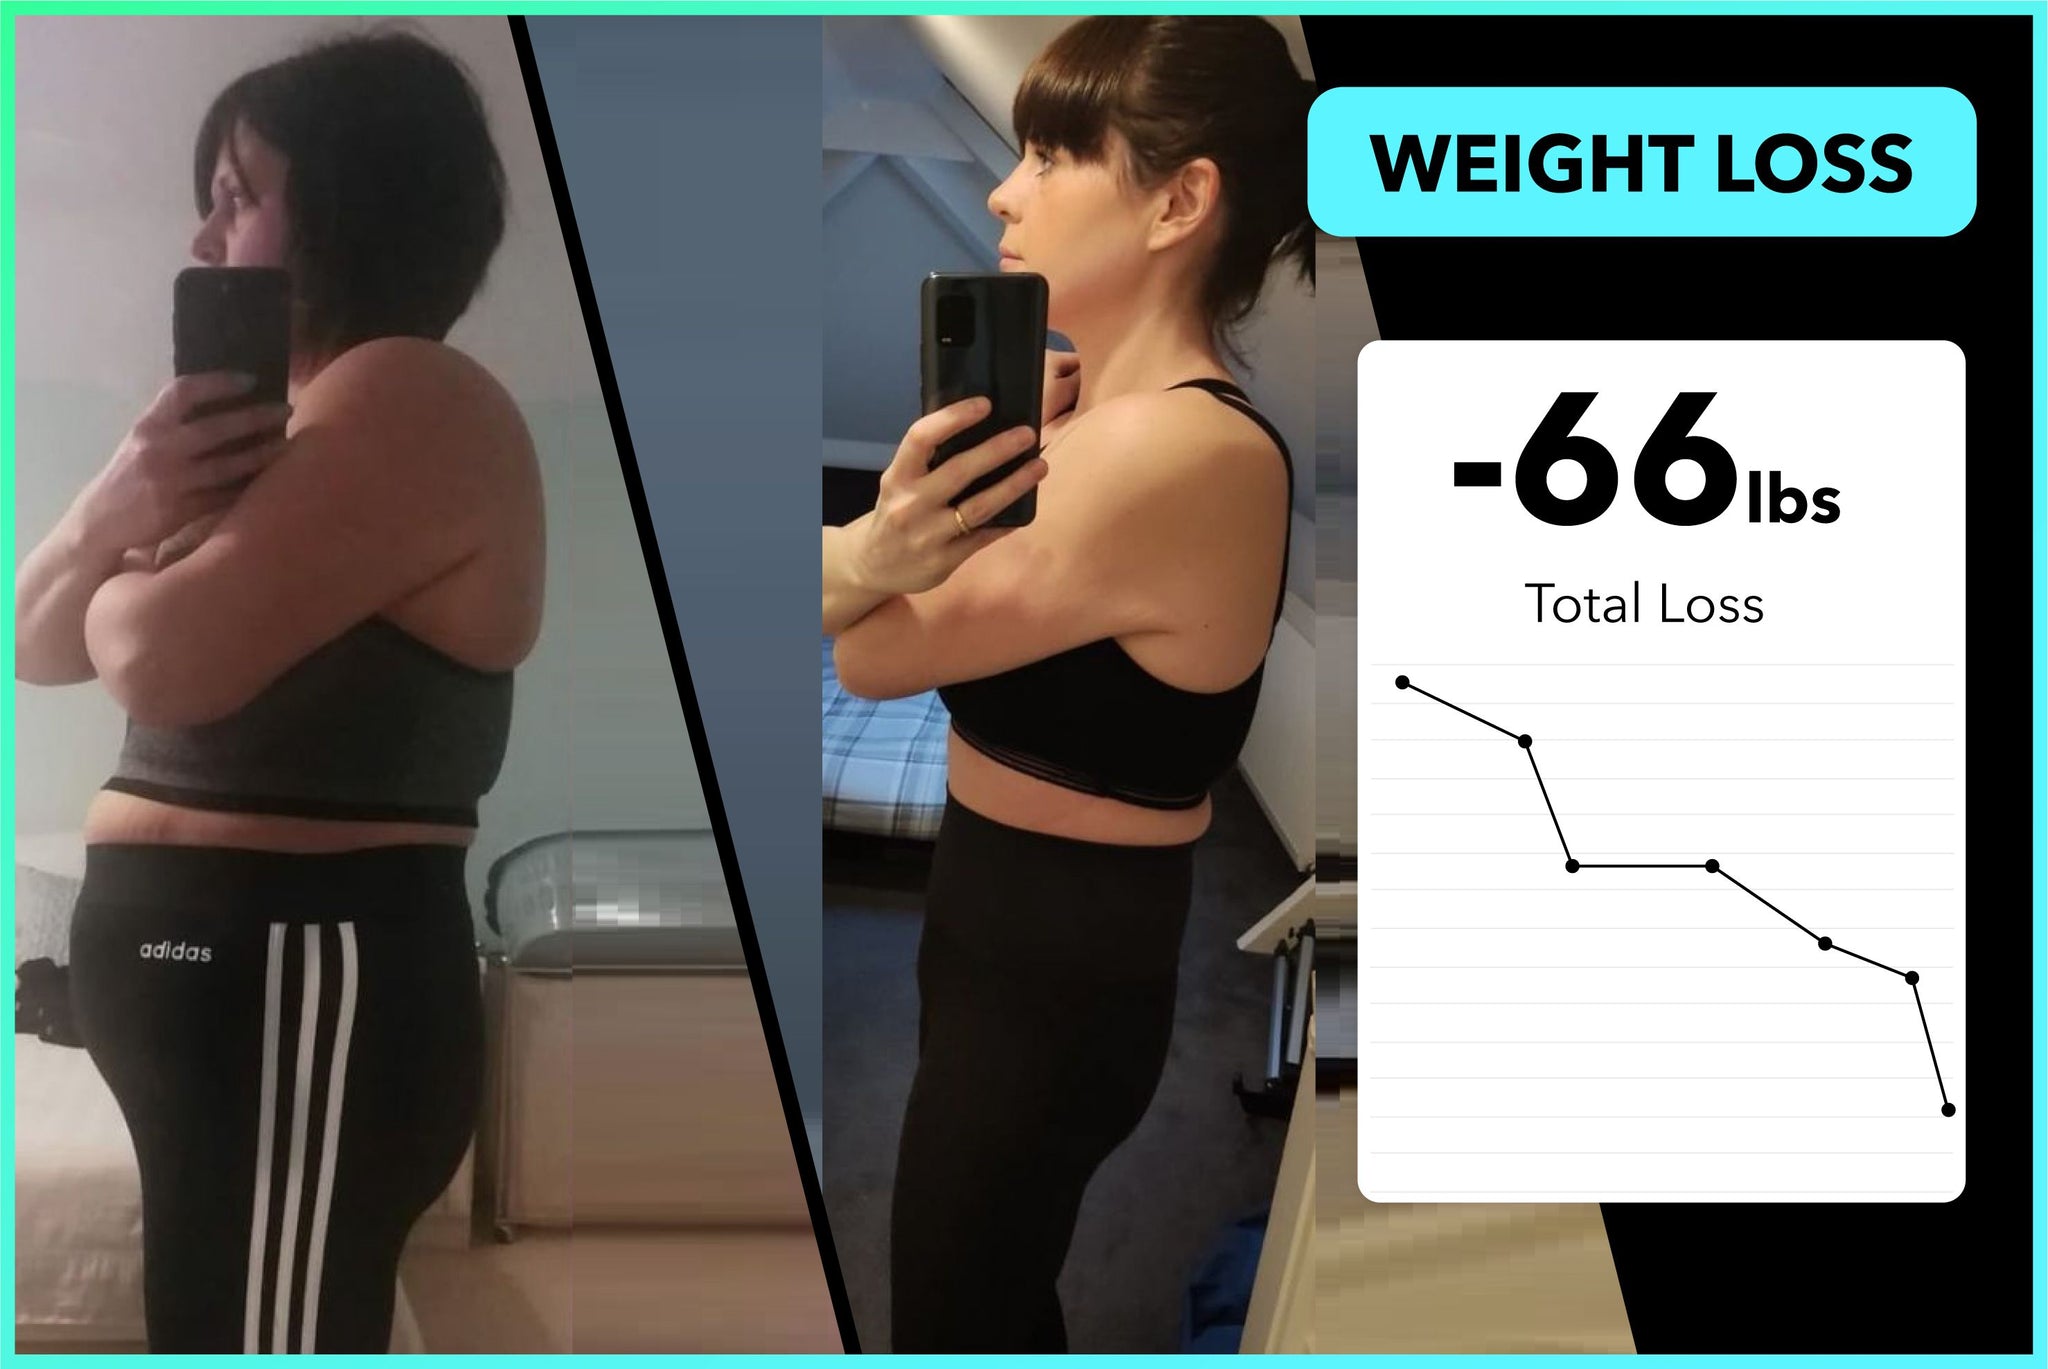 Kelly Has Lost 66lbs With Team RH